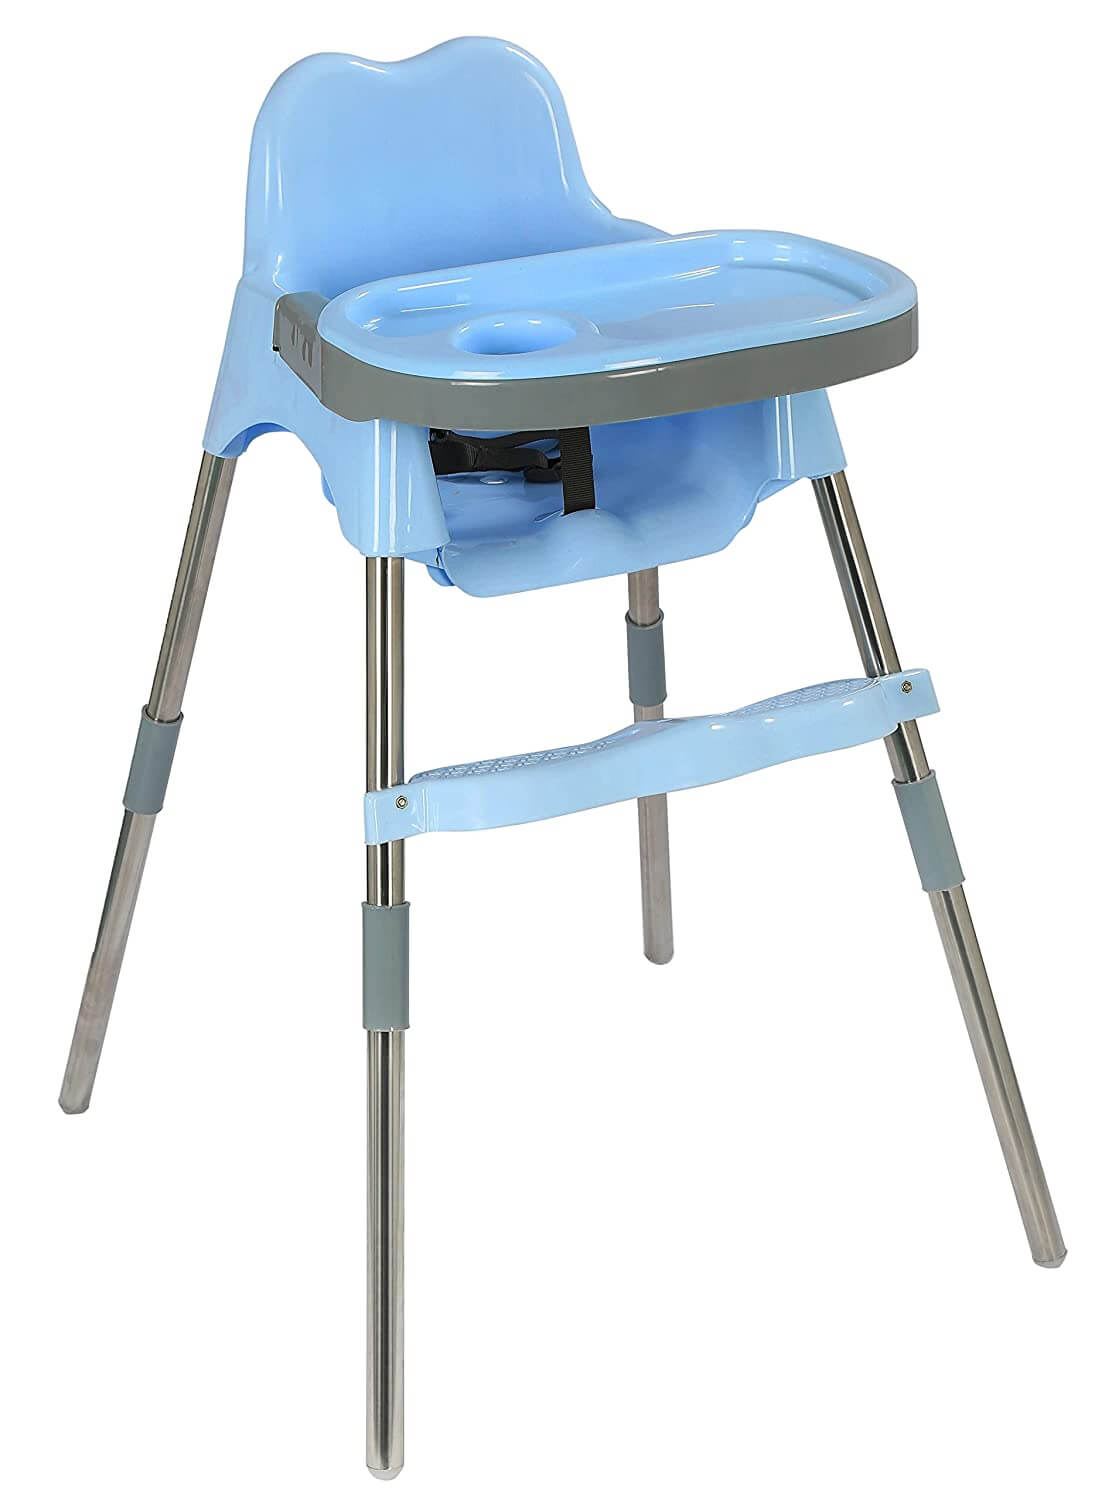 Esquire Spotty Baby Dining high chairs